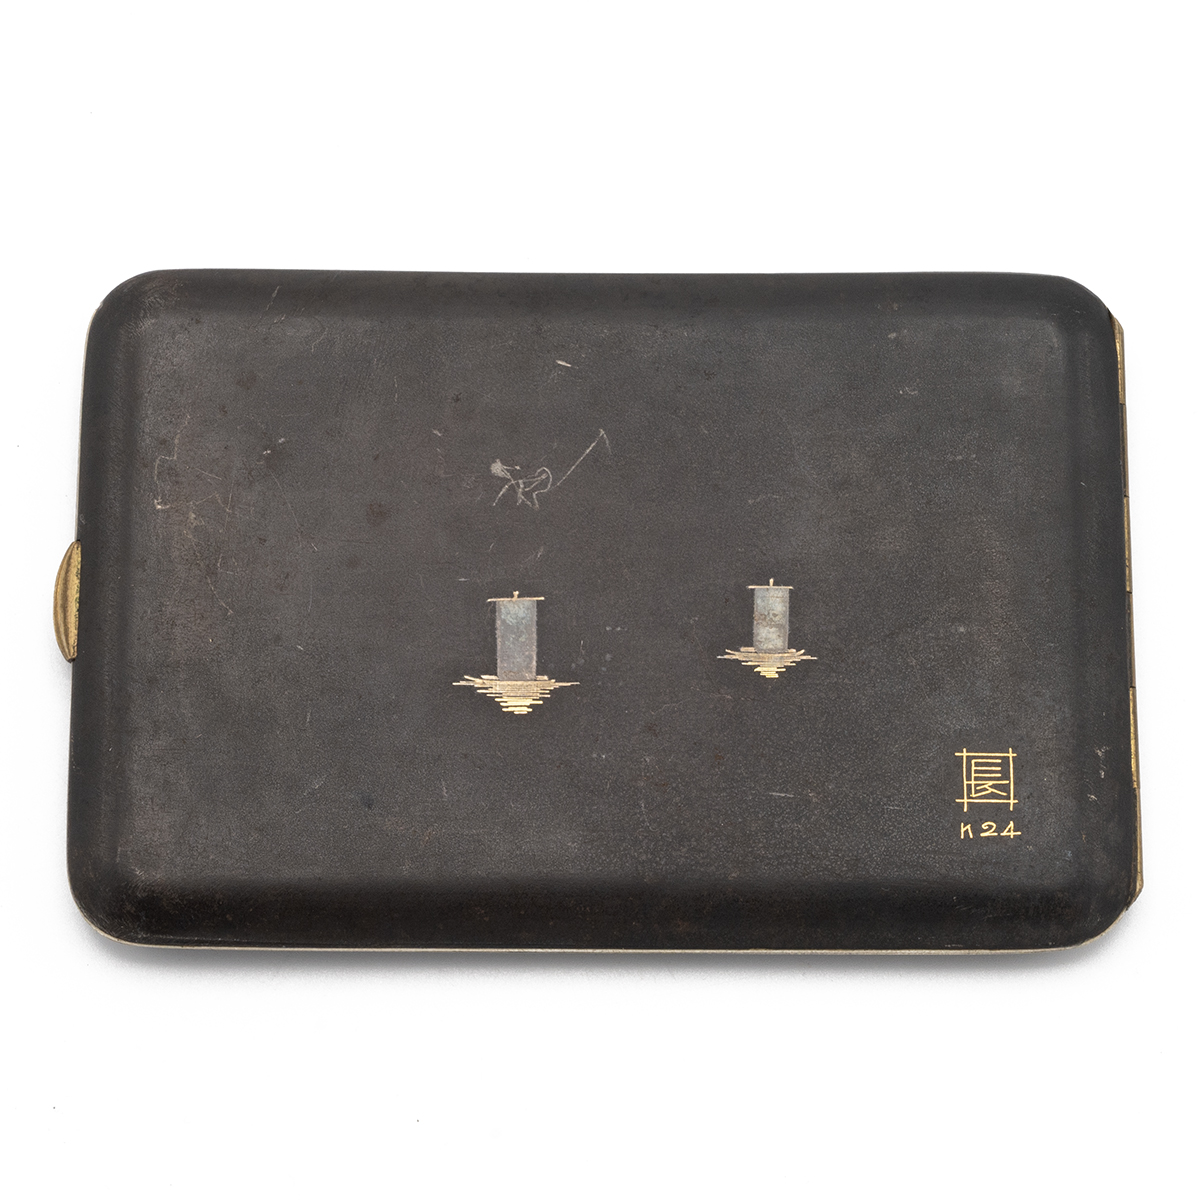 Japanese Meiji period Damascene cigarette case of steel, inlaid with 24ct gold, depicting pagoda ... - Image 3 of 3